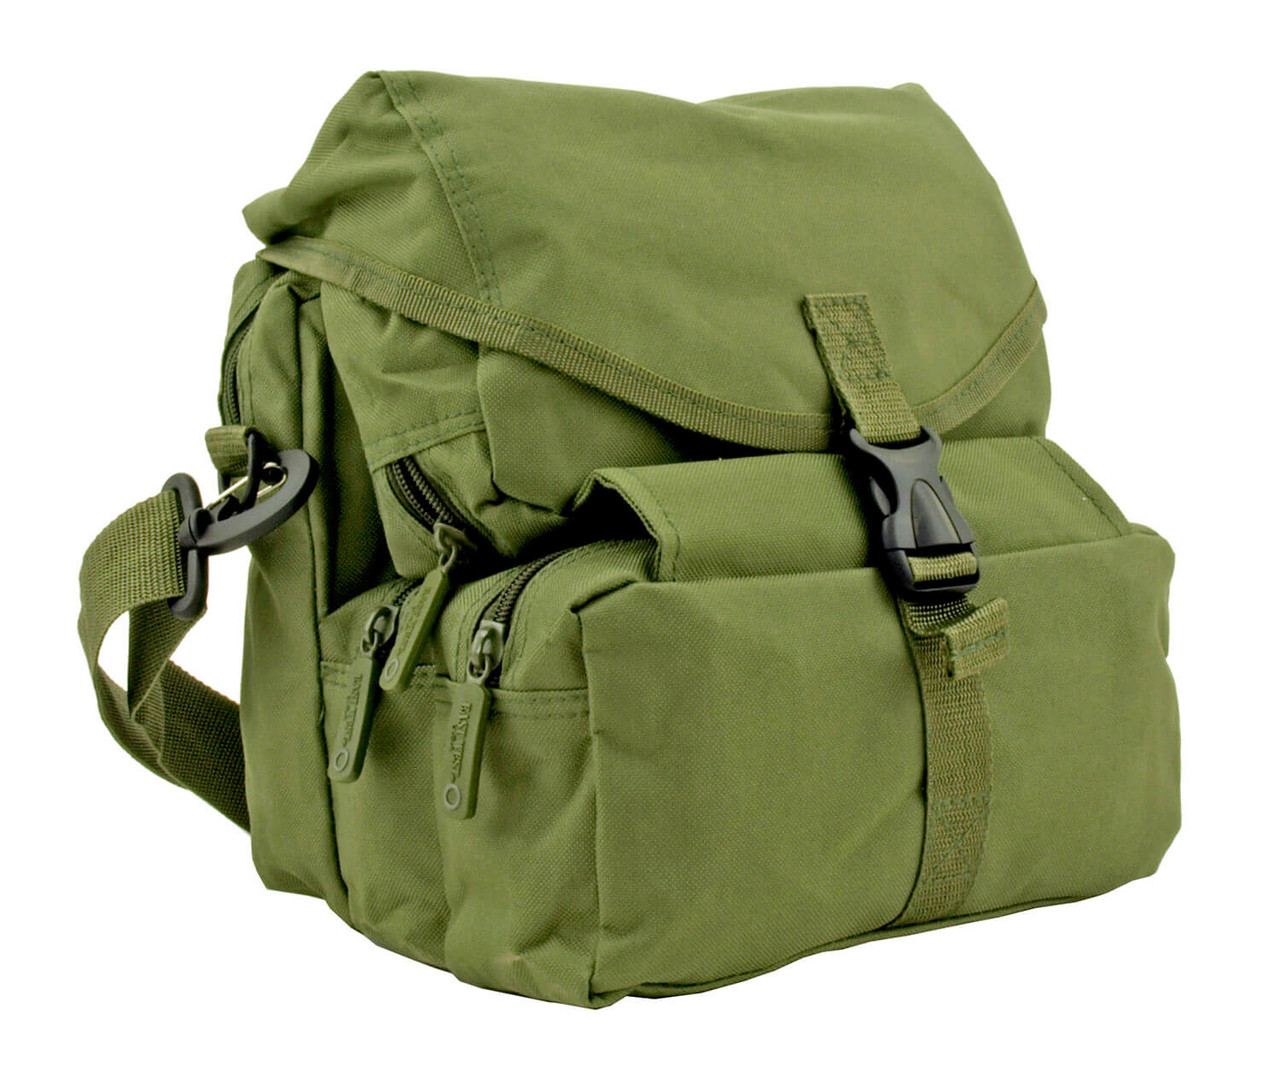 Tactical Molle Attachment Pouch by Chef Sac